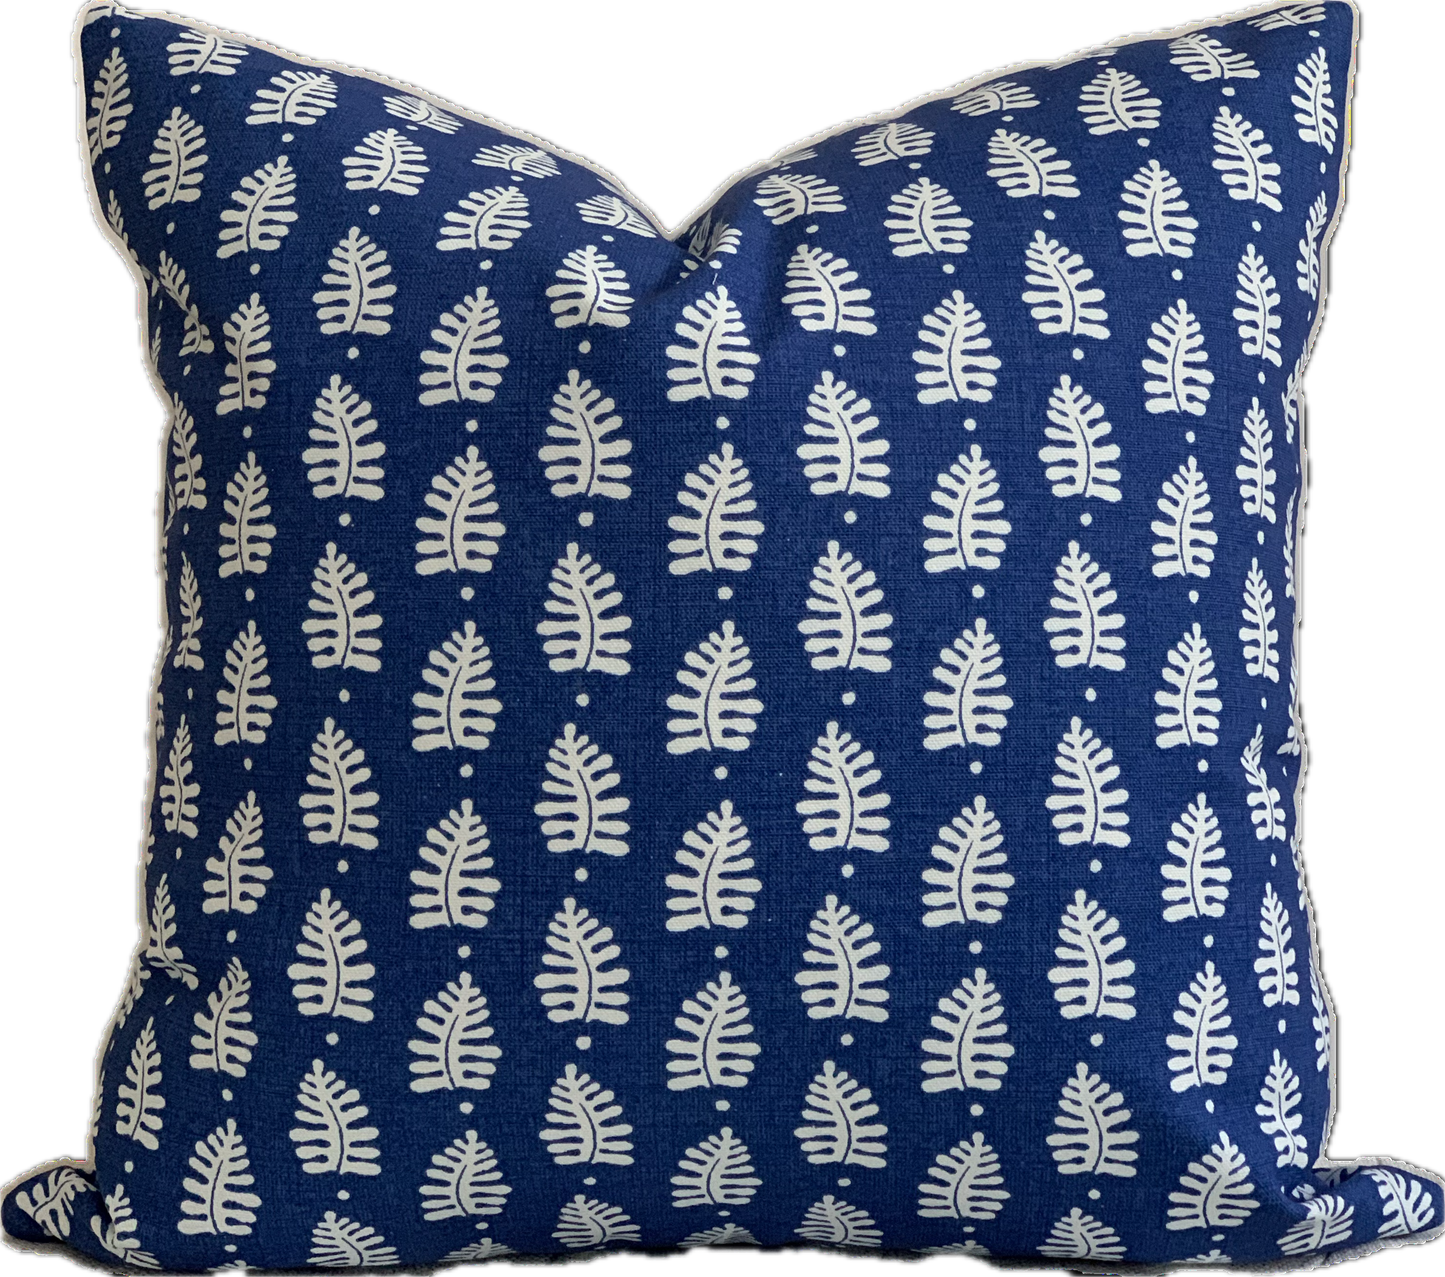 Blue and White Ferndale Pillow